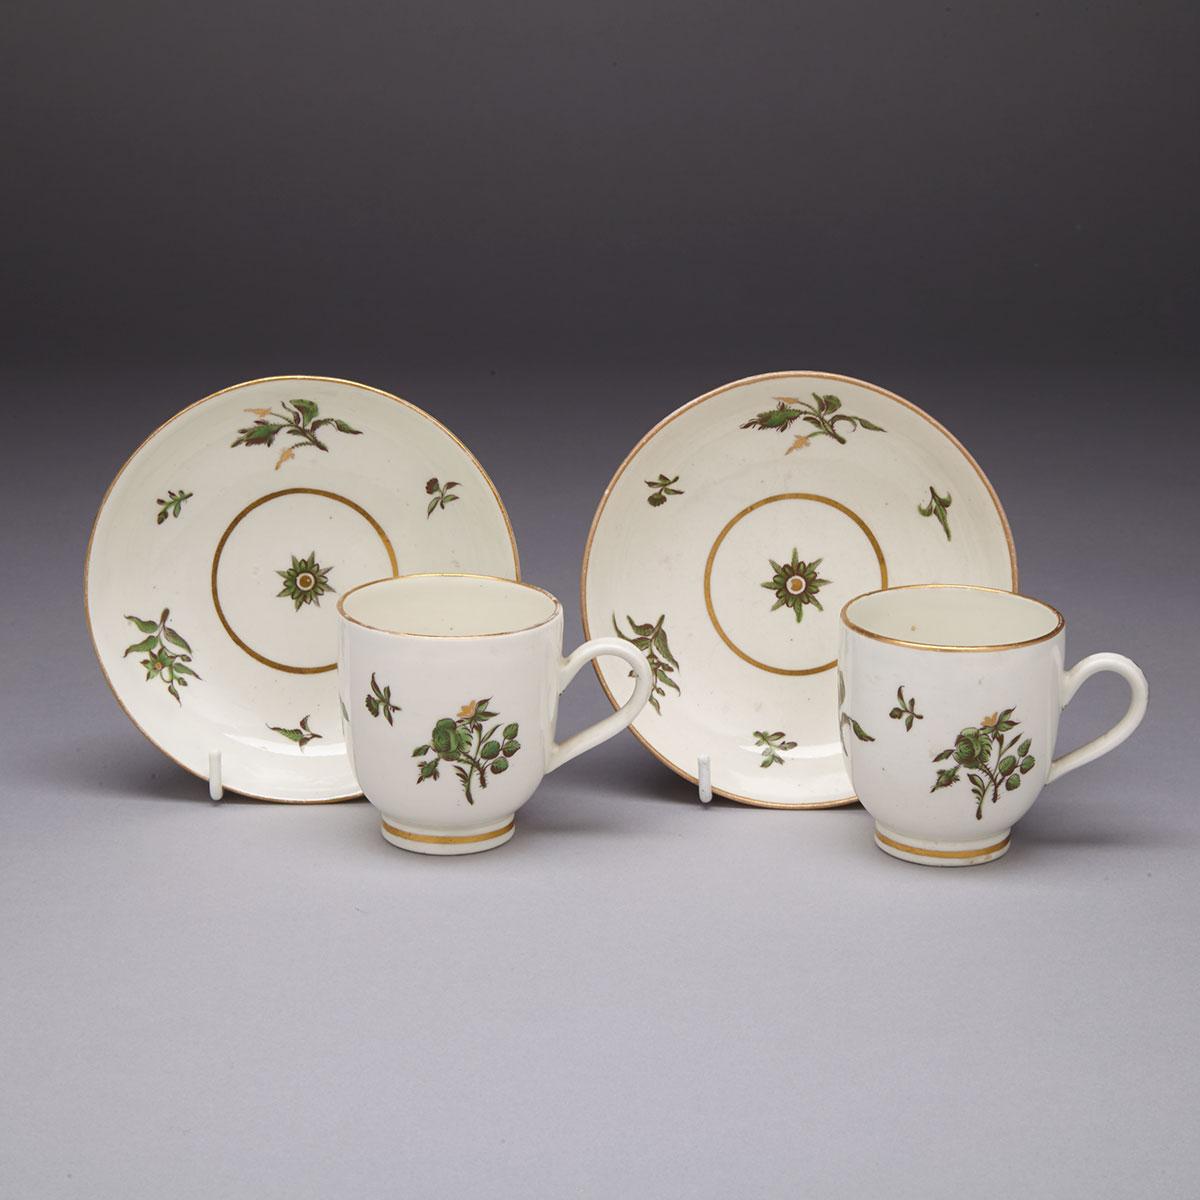 Pair of Worcester Coffee Cups and Saucers, c.1785-90